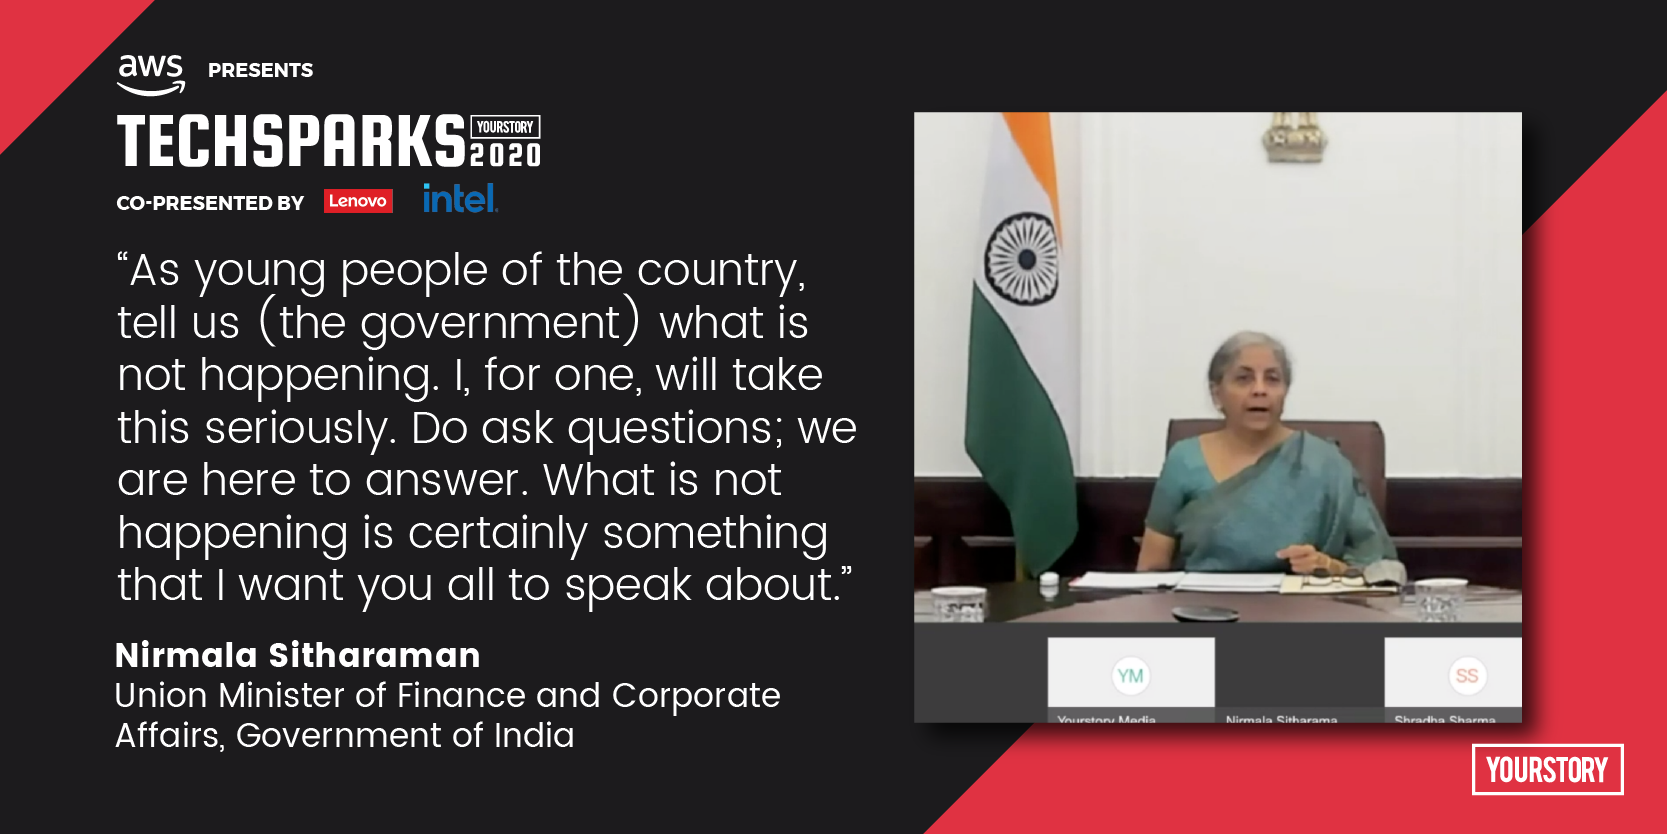 [TechSparks 2020] FM Nirmala Sitharaman lauds businesses for resilience amidst COVID-19; says government here to listen and do what India needs